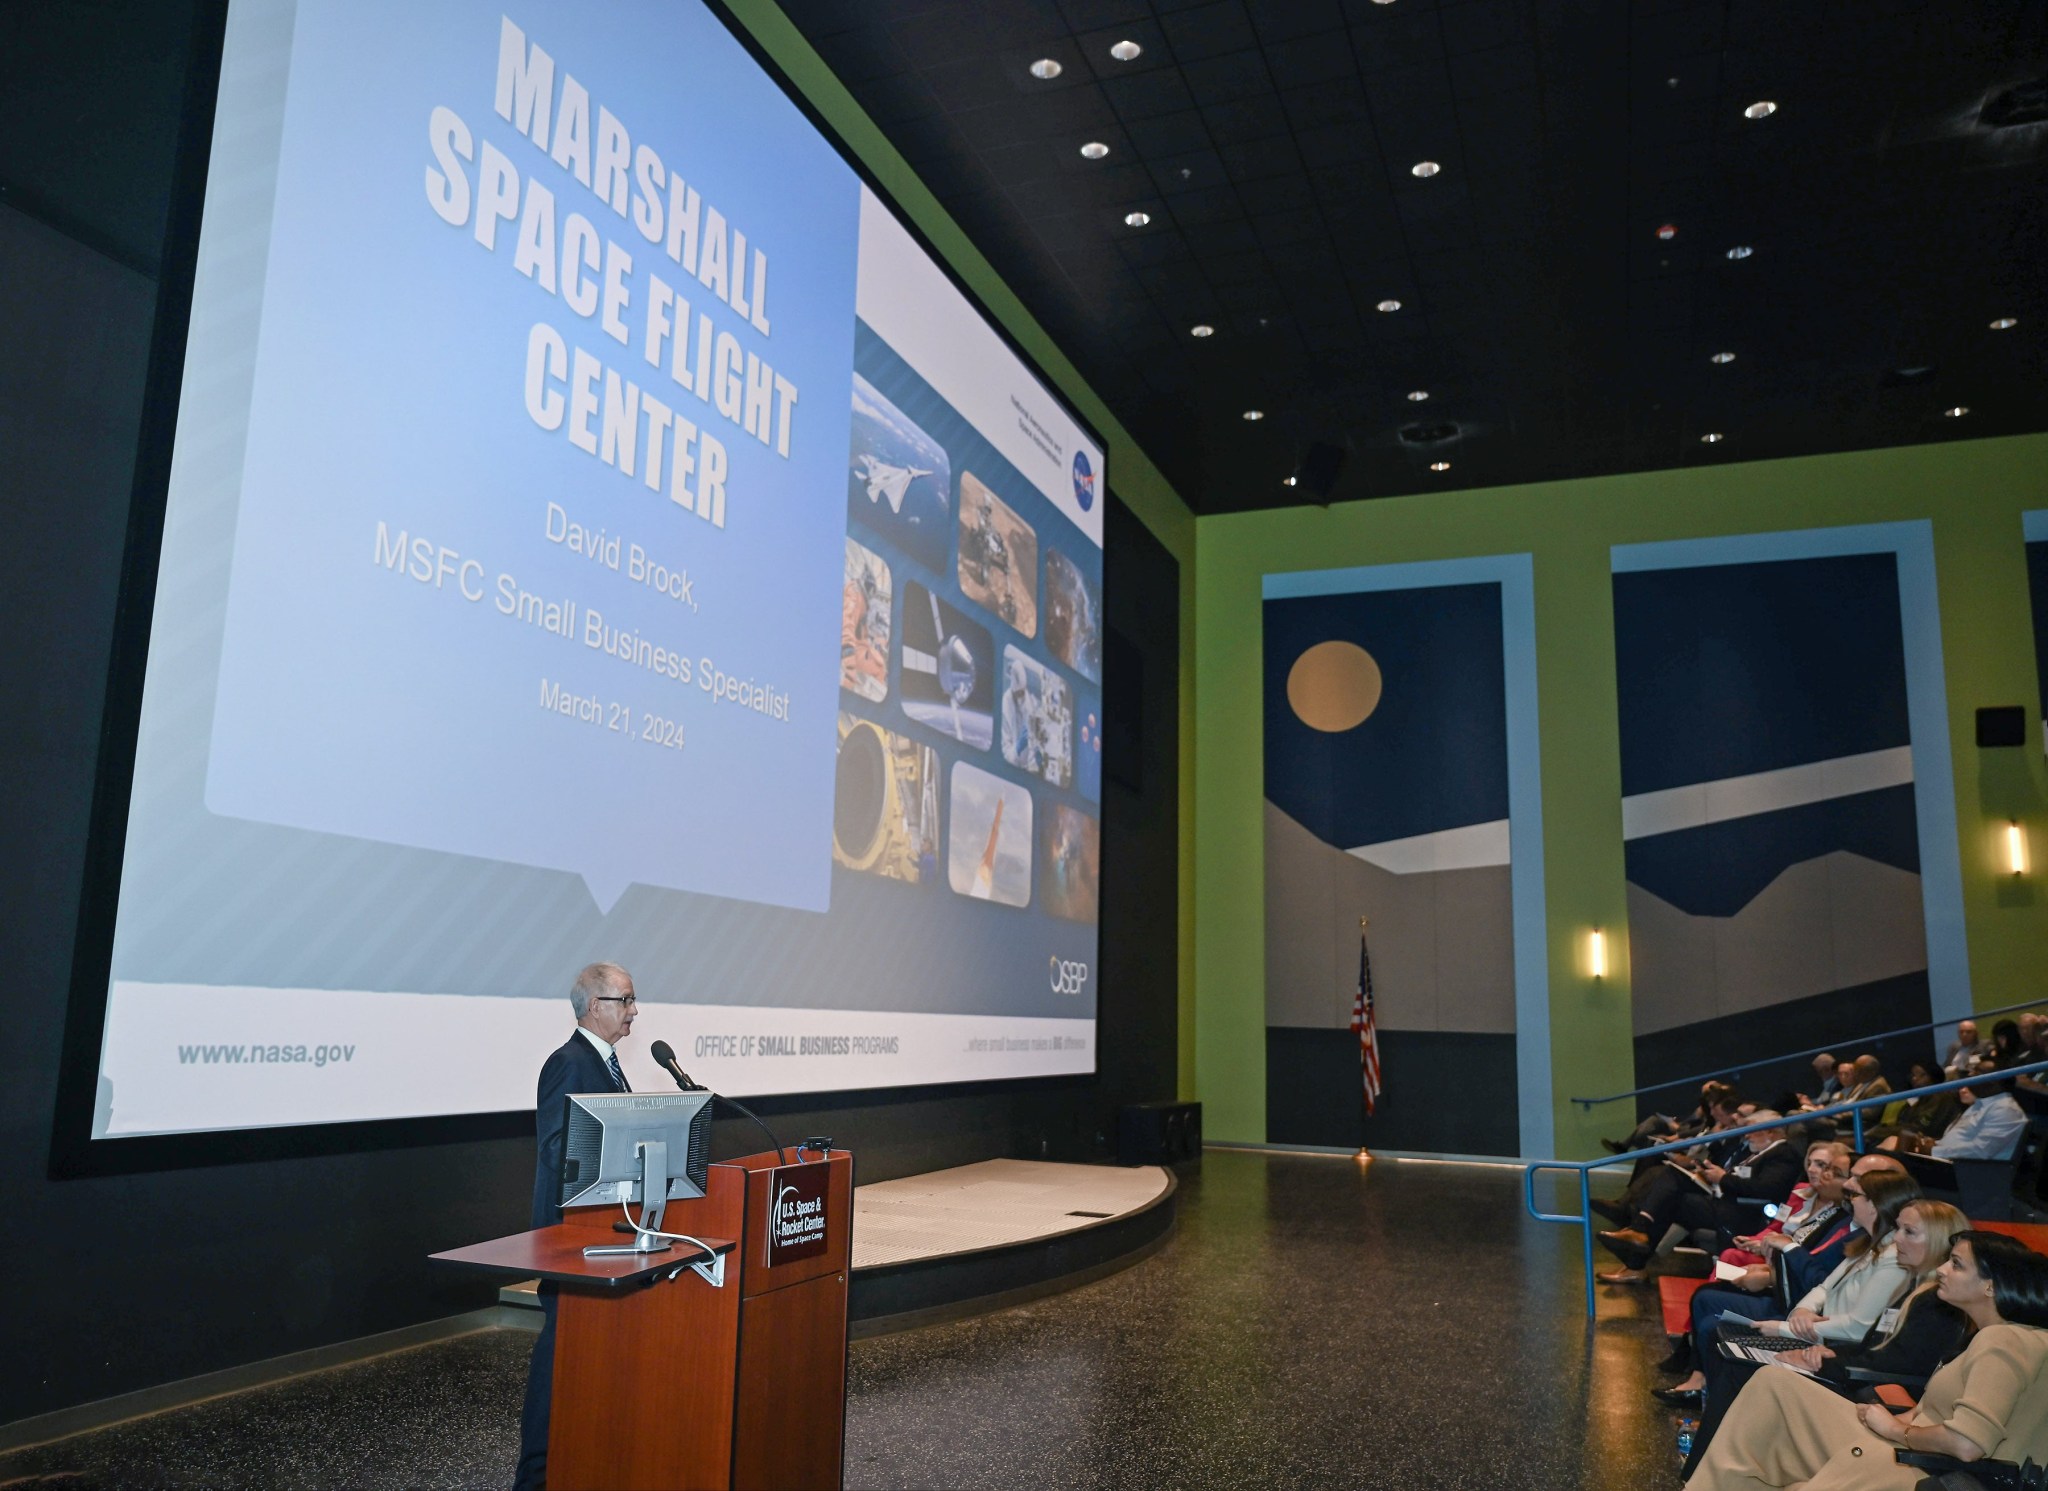 David Brock, small business specialist at NASA’s Marshall Space Flight Center, talks to attendees at the 37th Small Business Alliance meeting March 21.